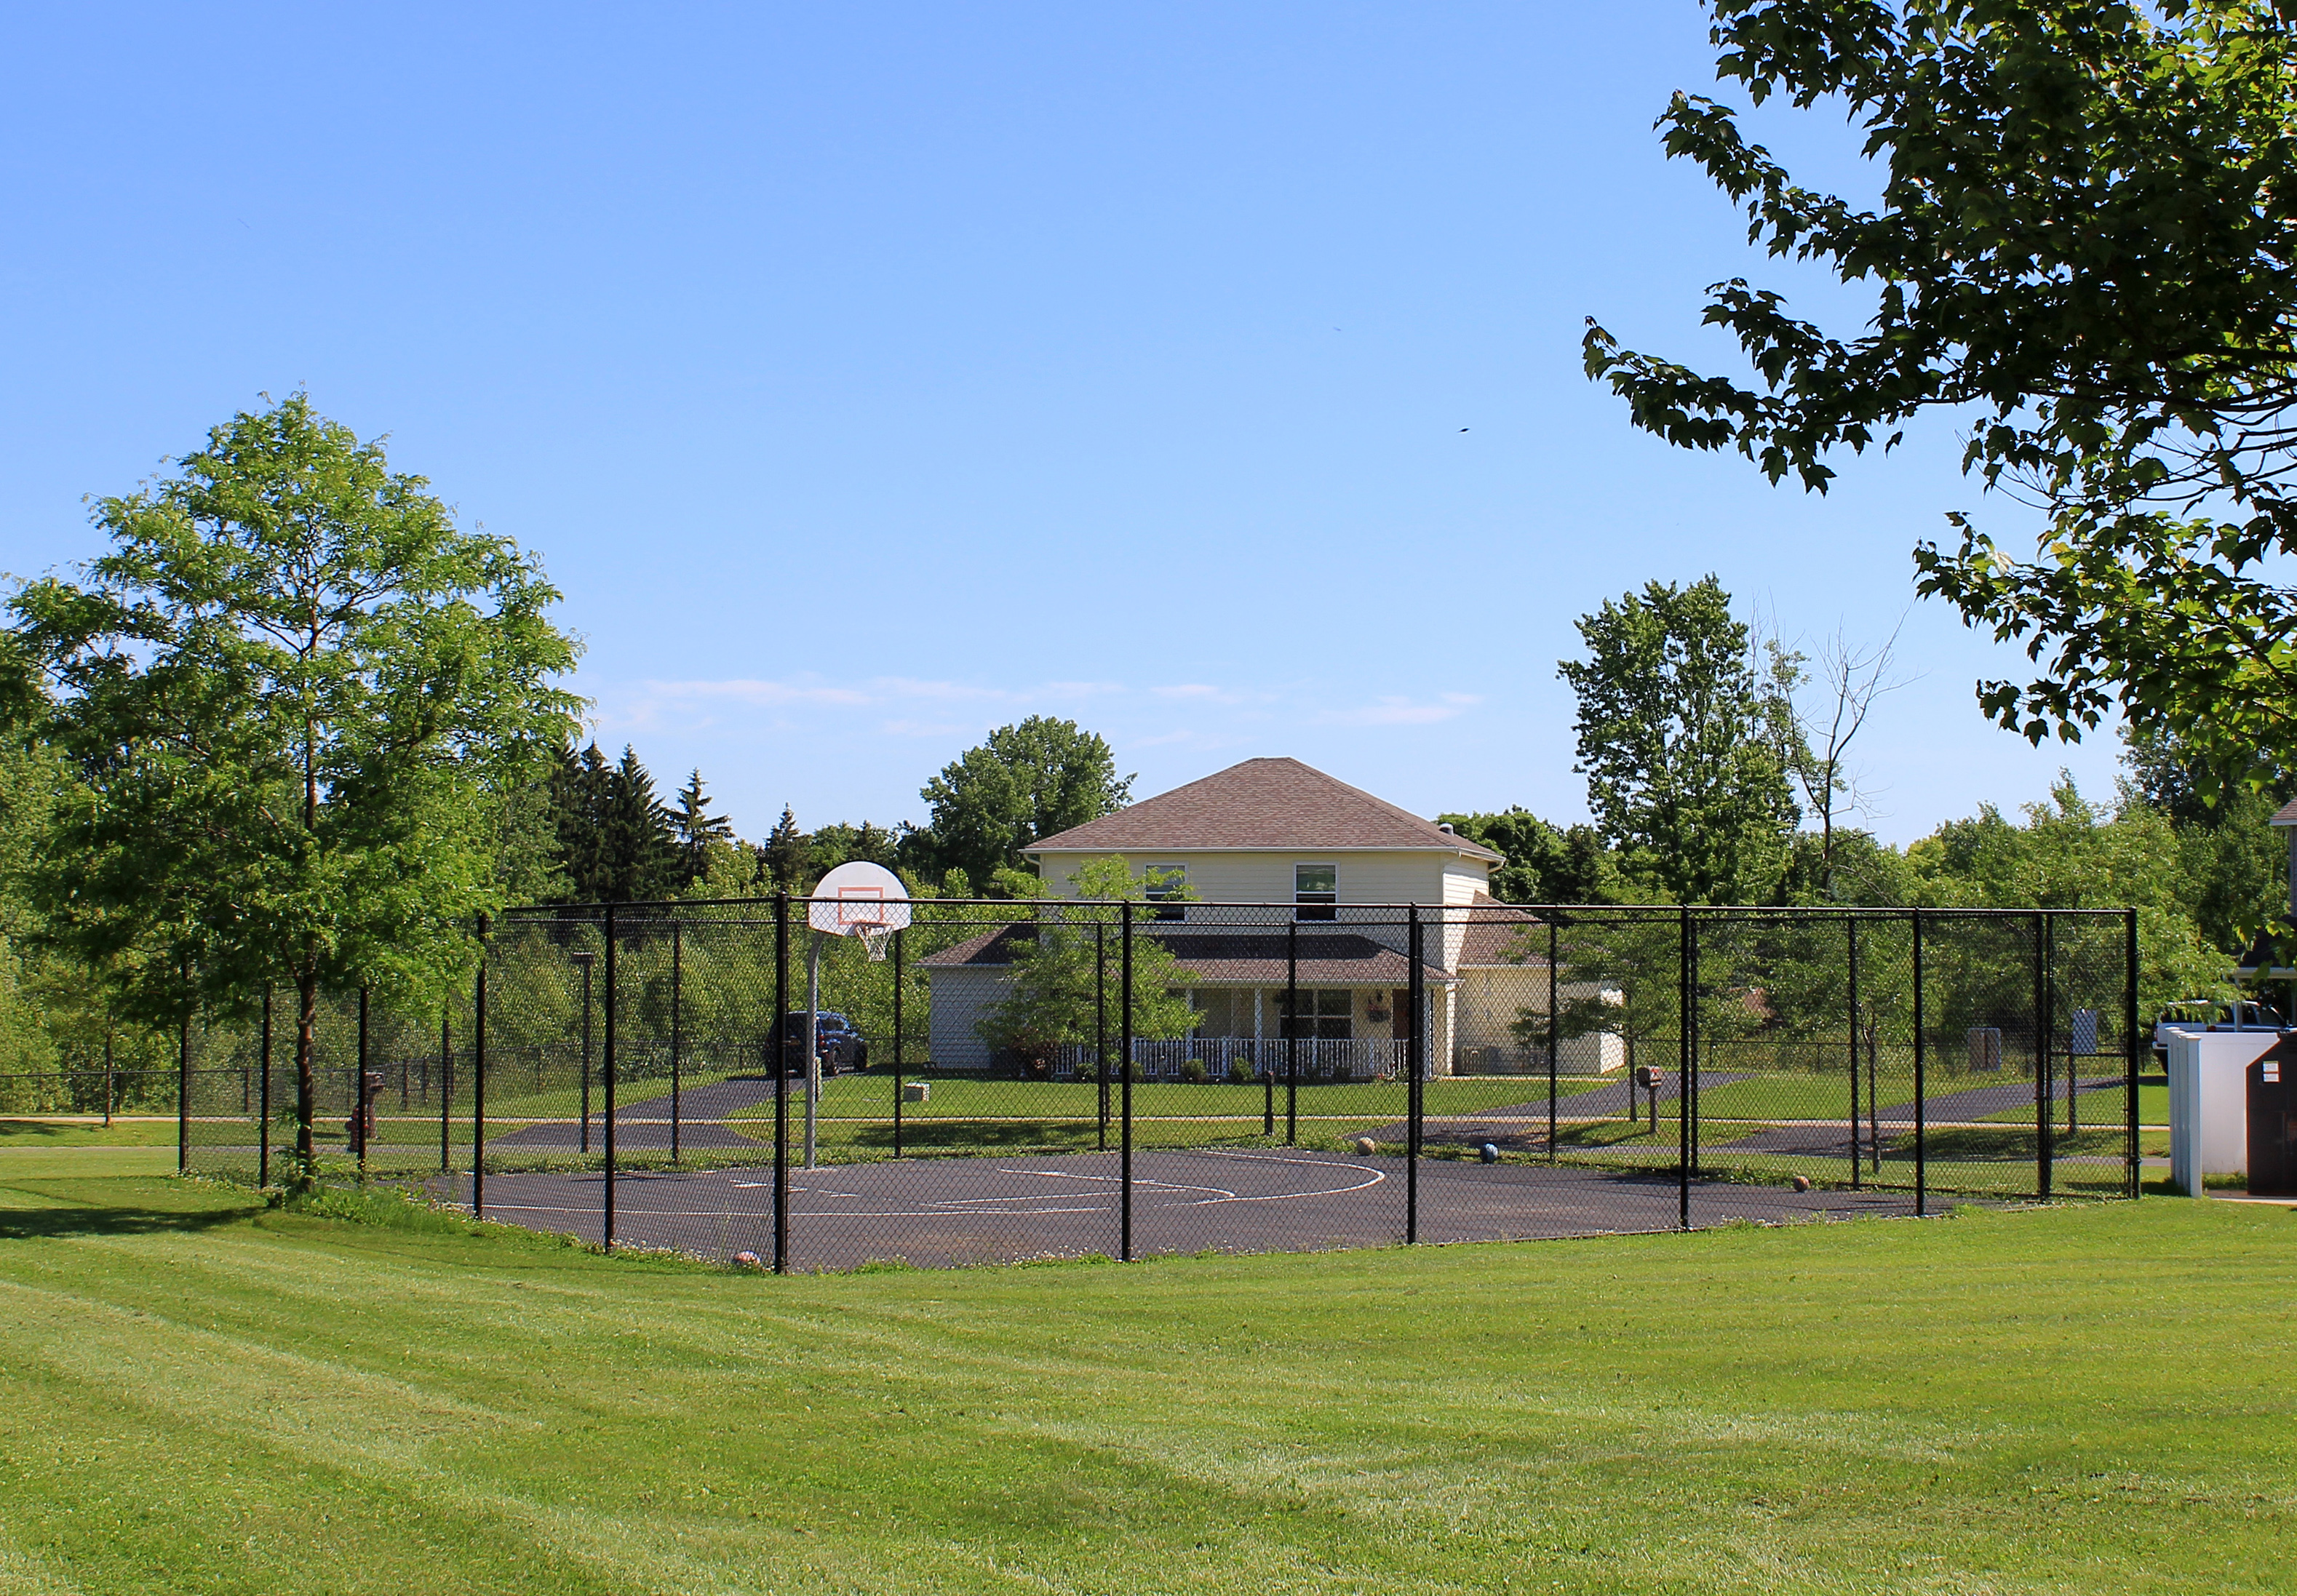 property management company client list syracuse ny image of basketball court at greenville hills